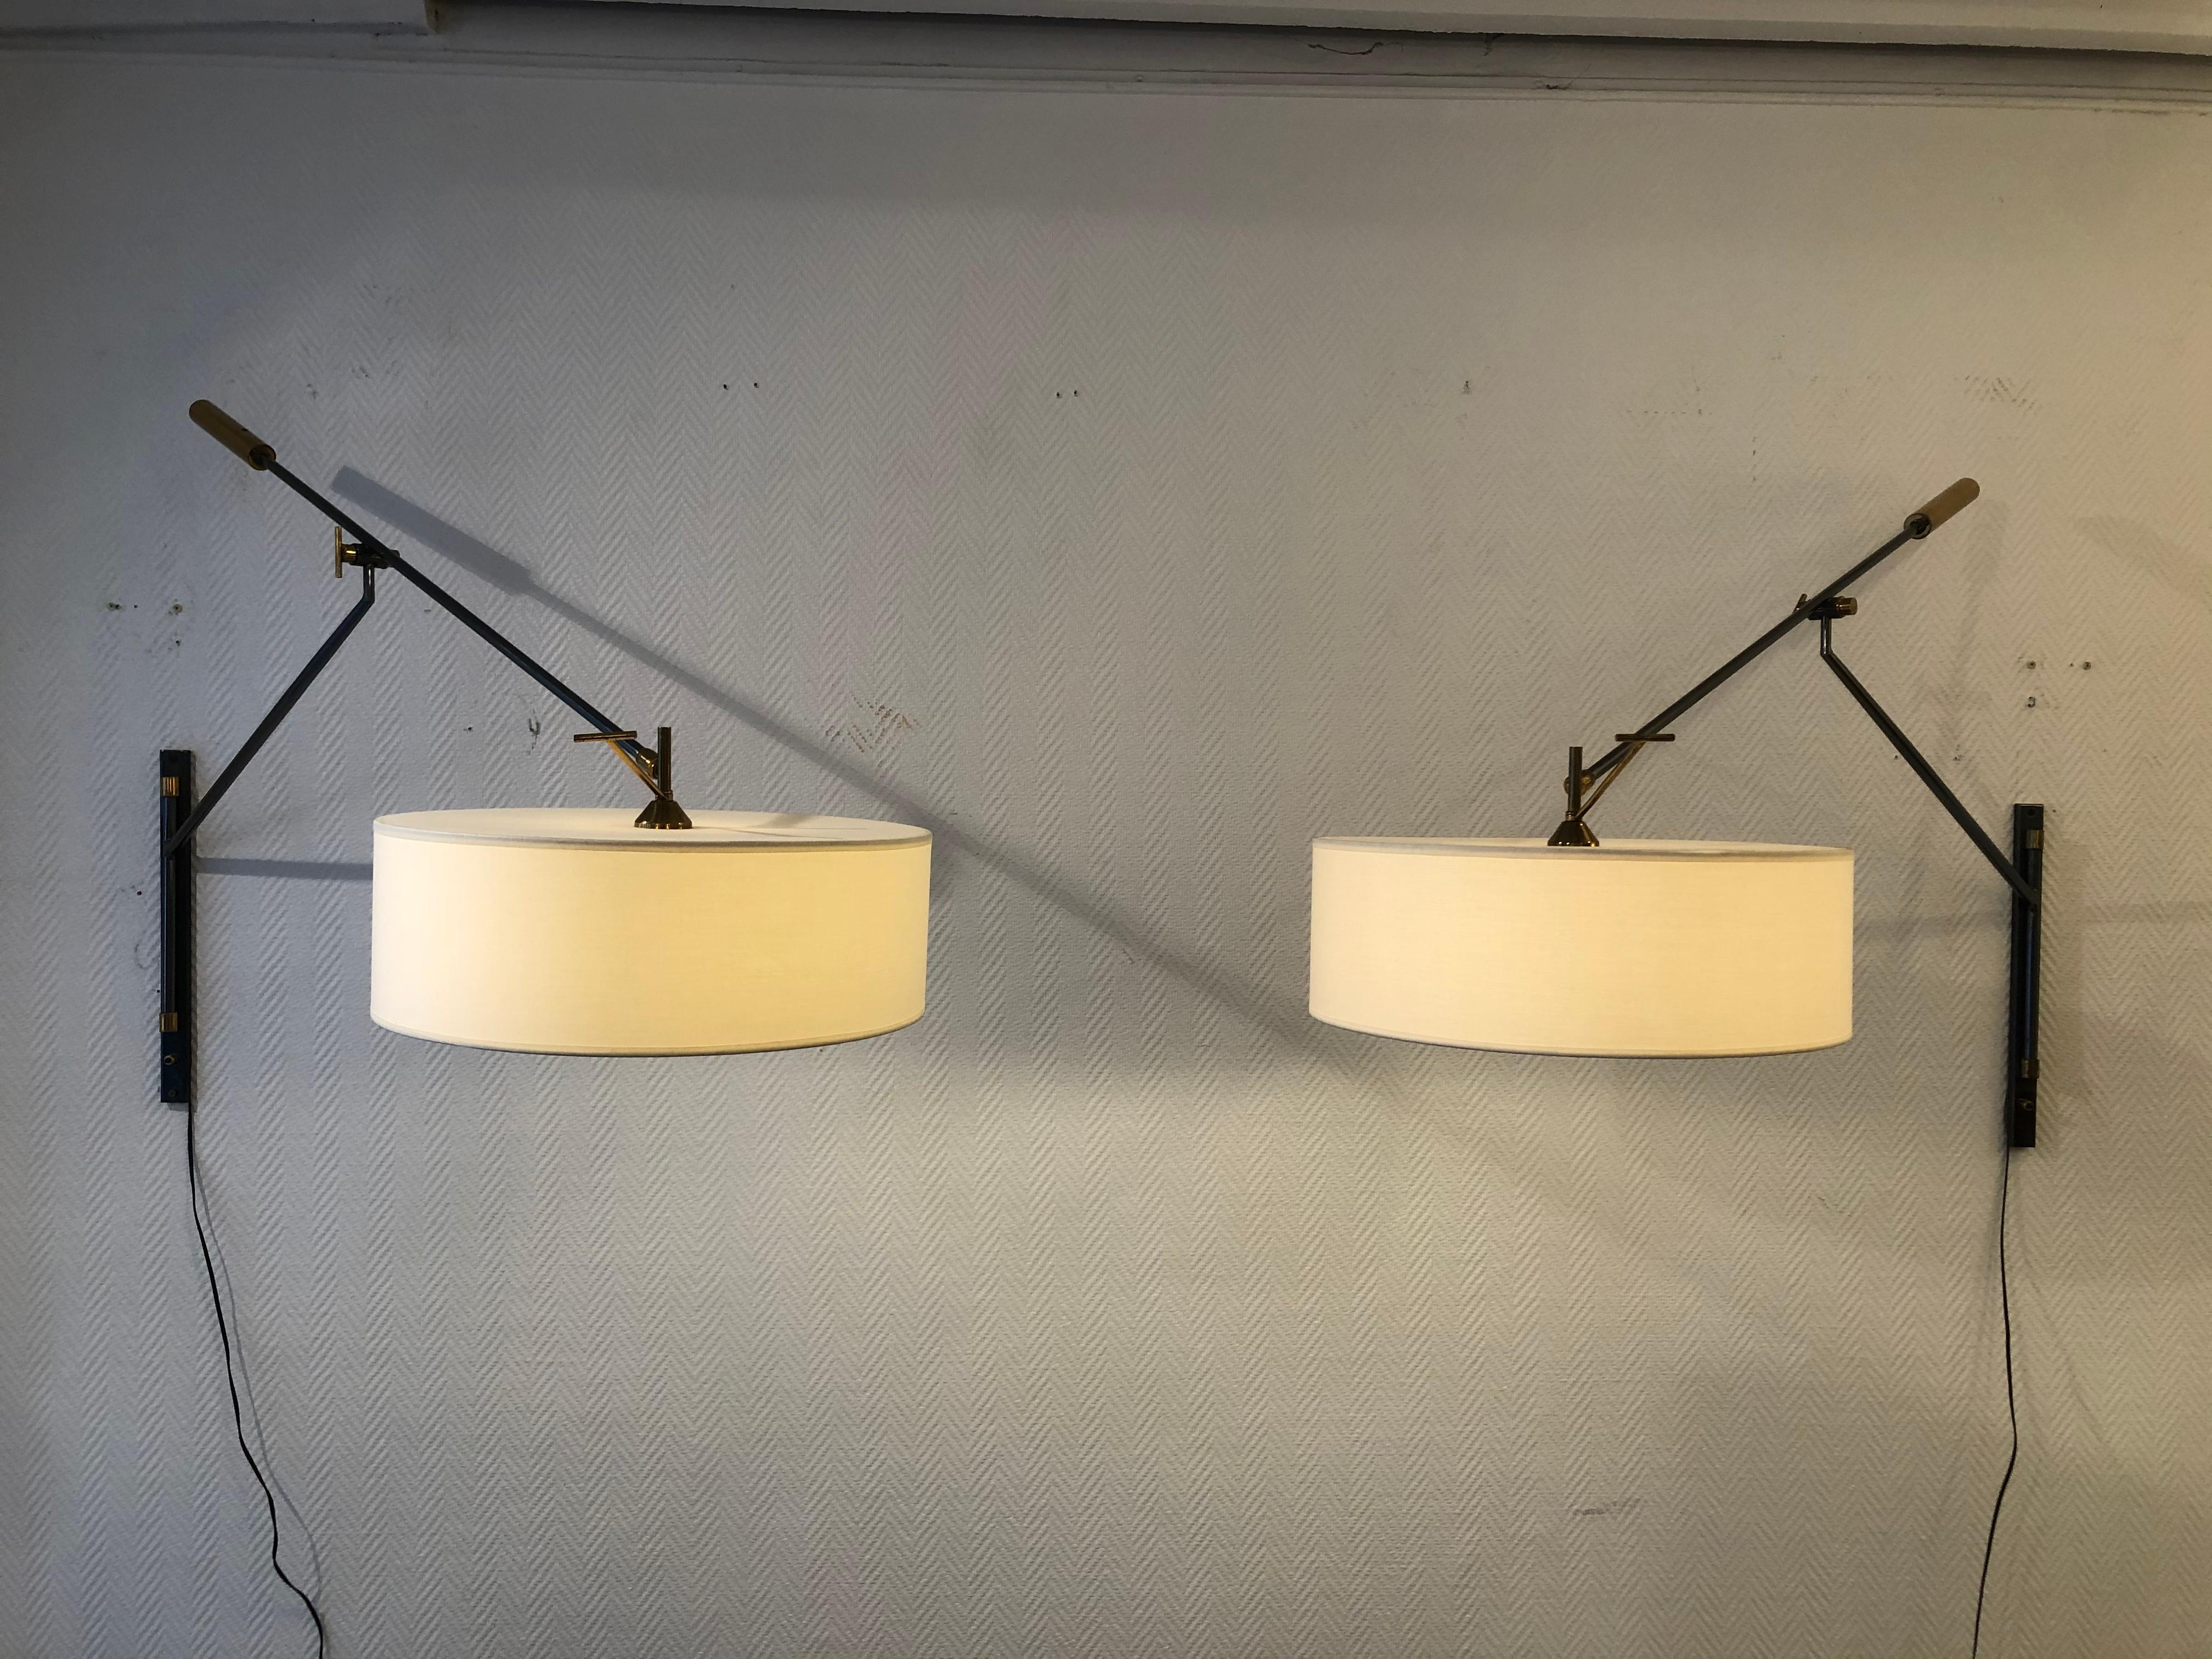 Pair of wall lights with adjustable counterweight by Lunel
From 1950
In metal.